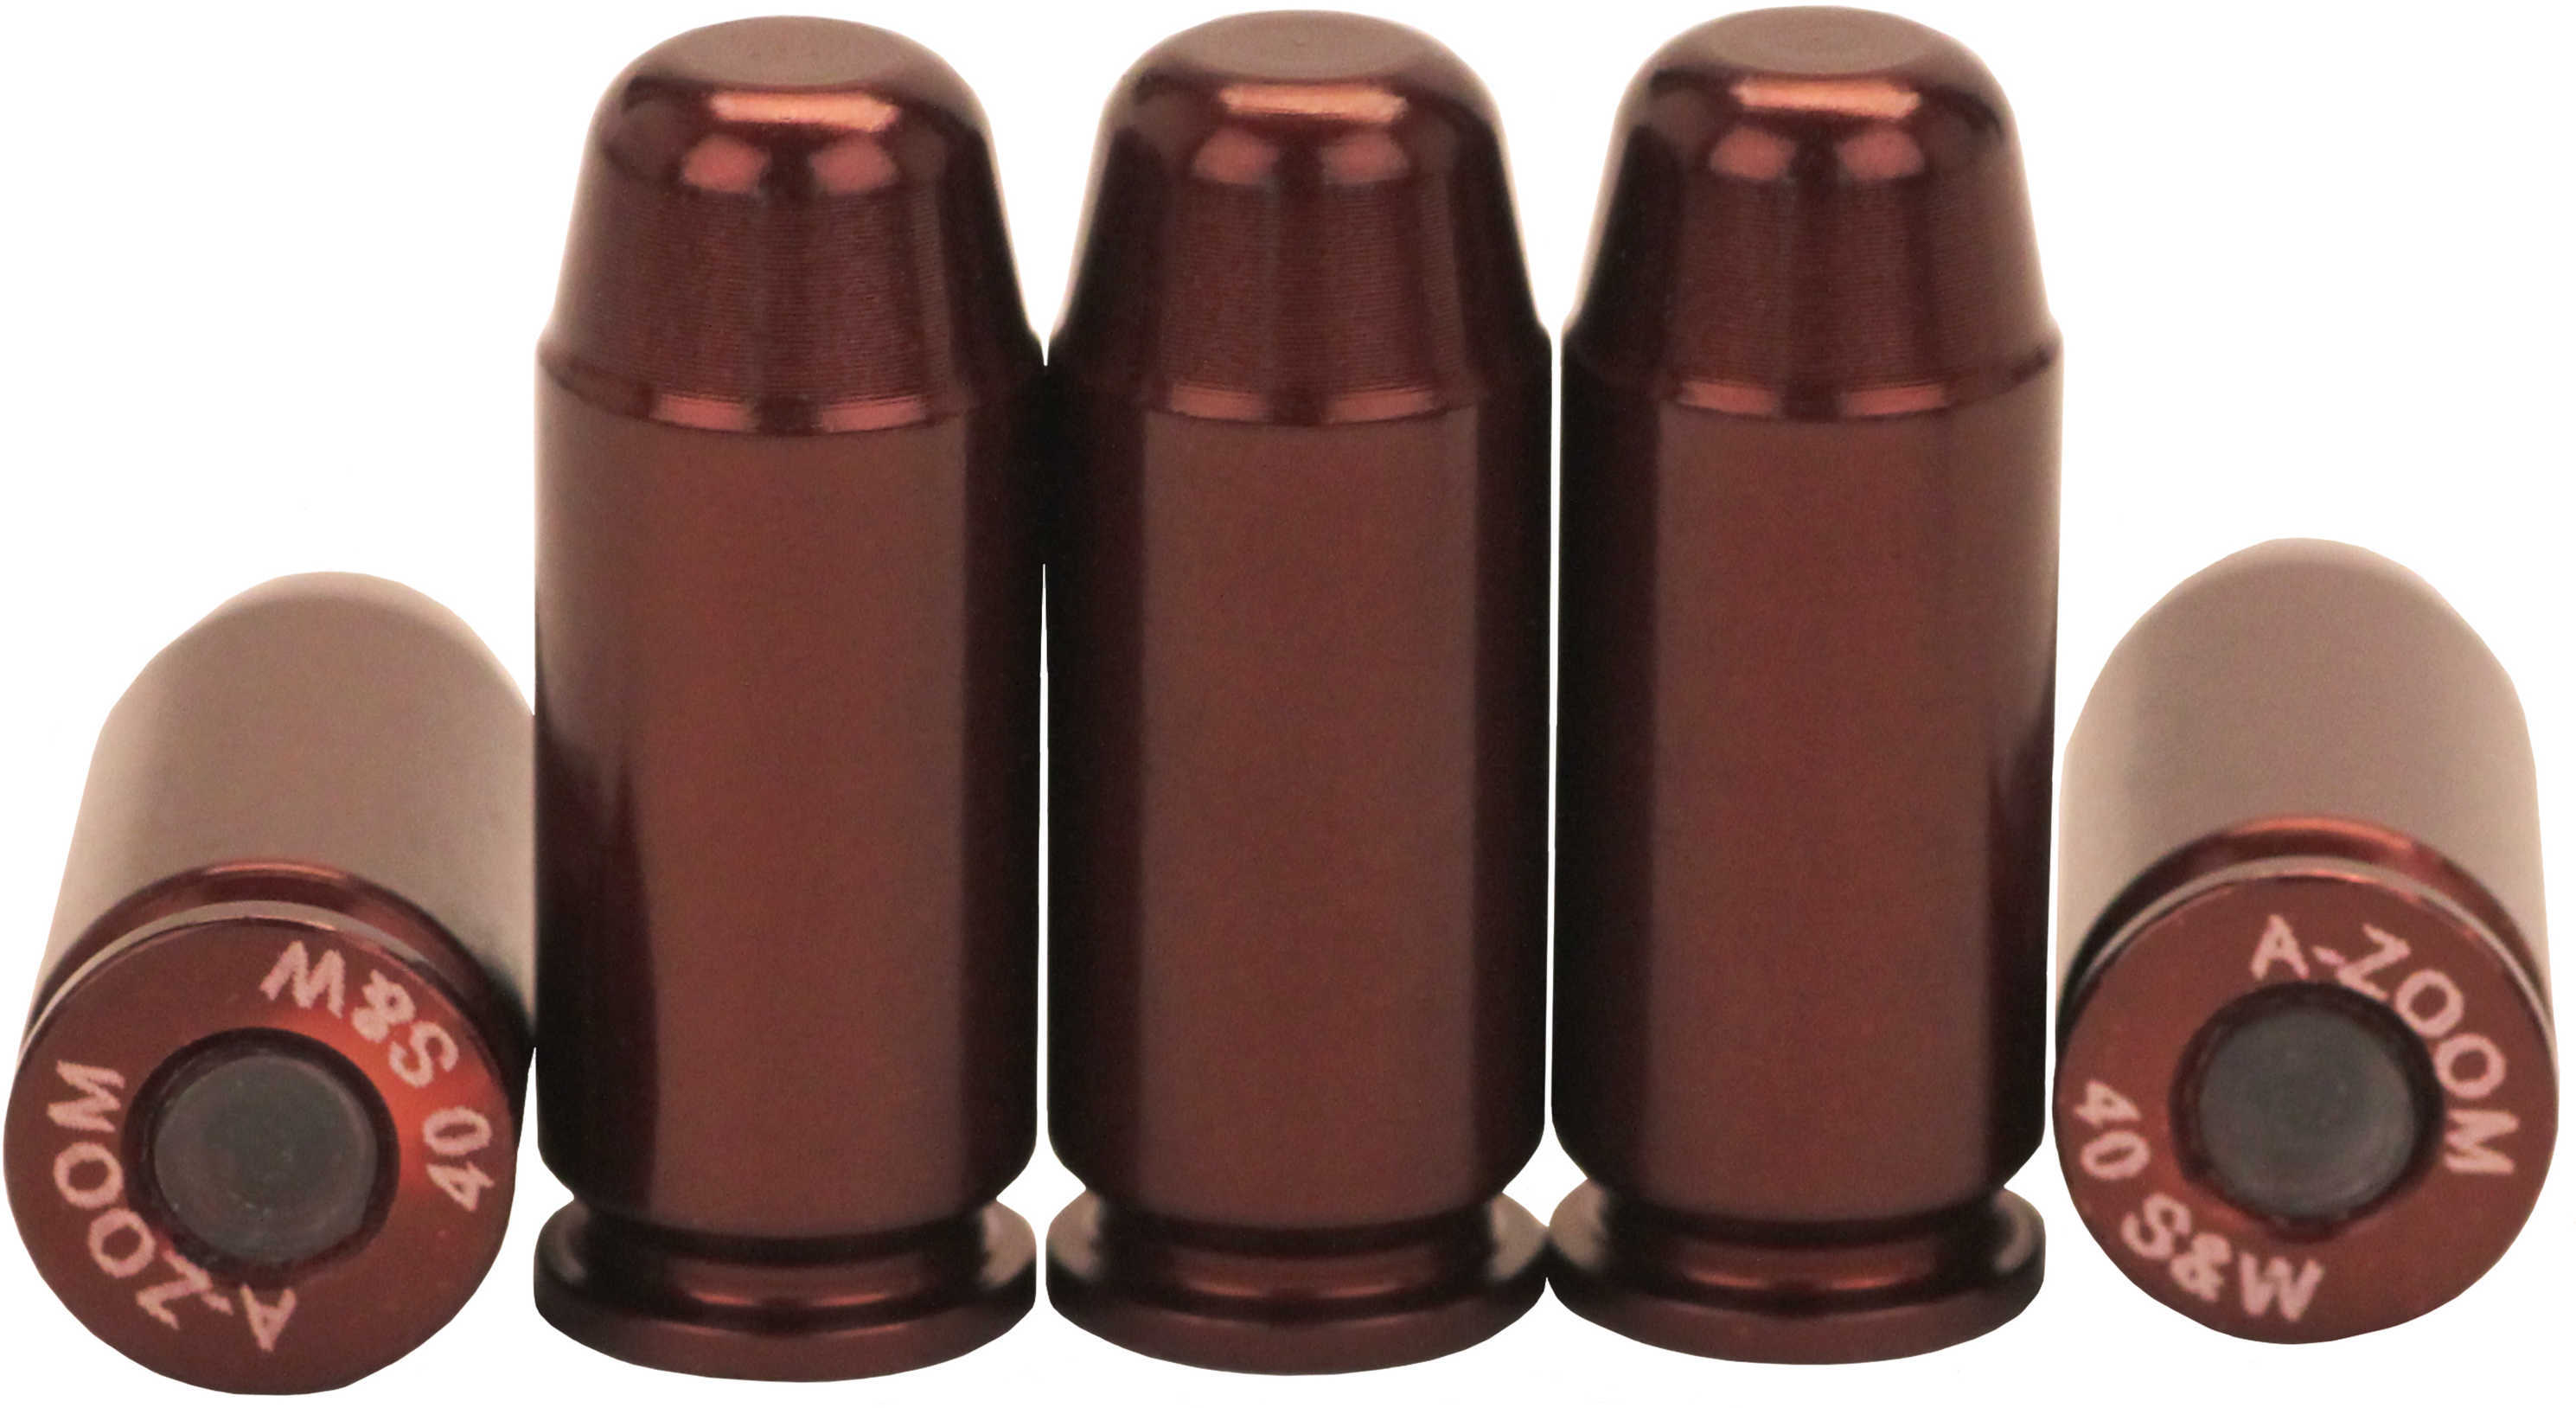 A-Zoom Precision Metal Snap Caps 40 S&W, 5 Per Pack For Safety Training, Function Testing Or safely decocking Without da